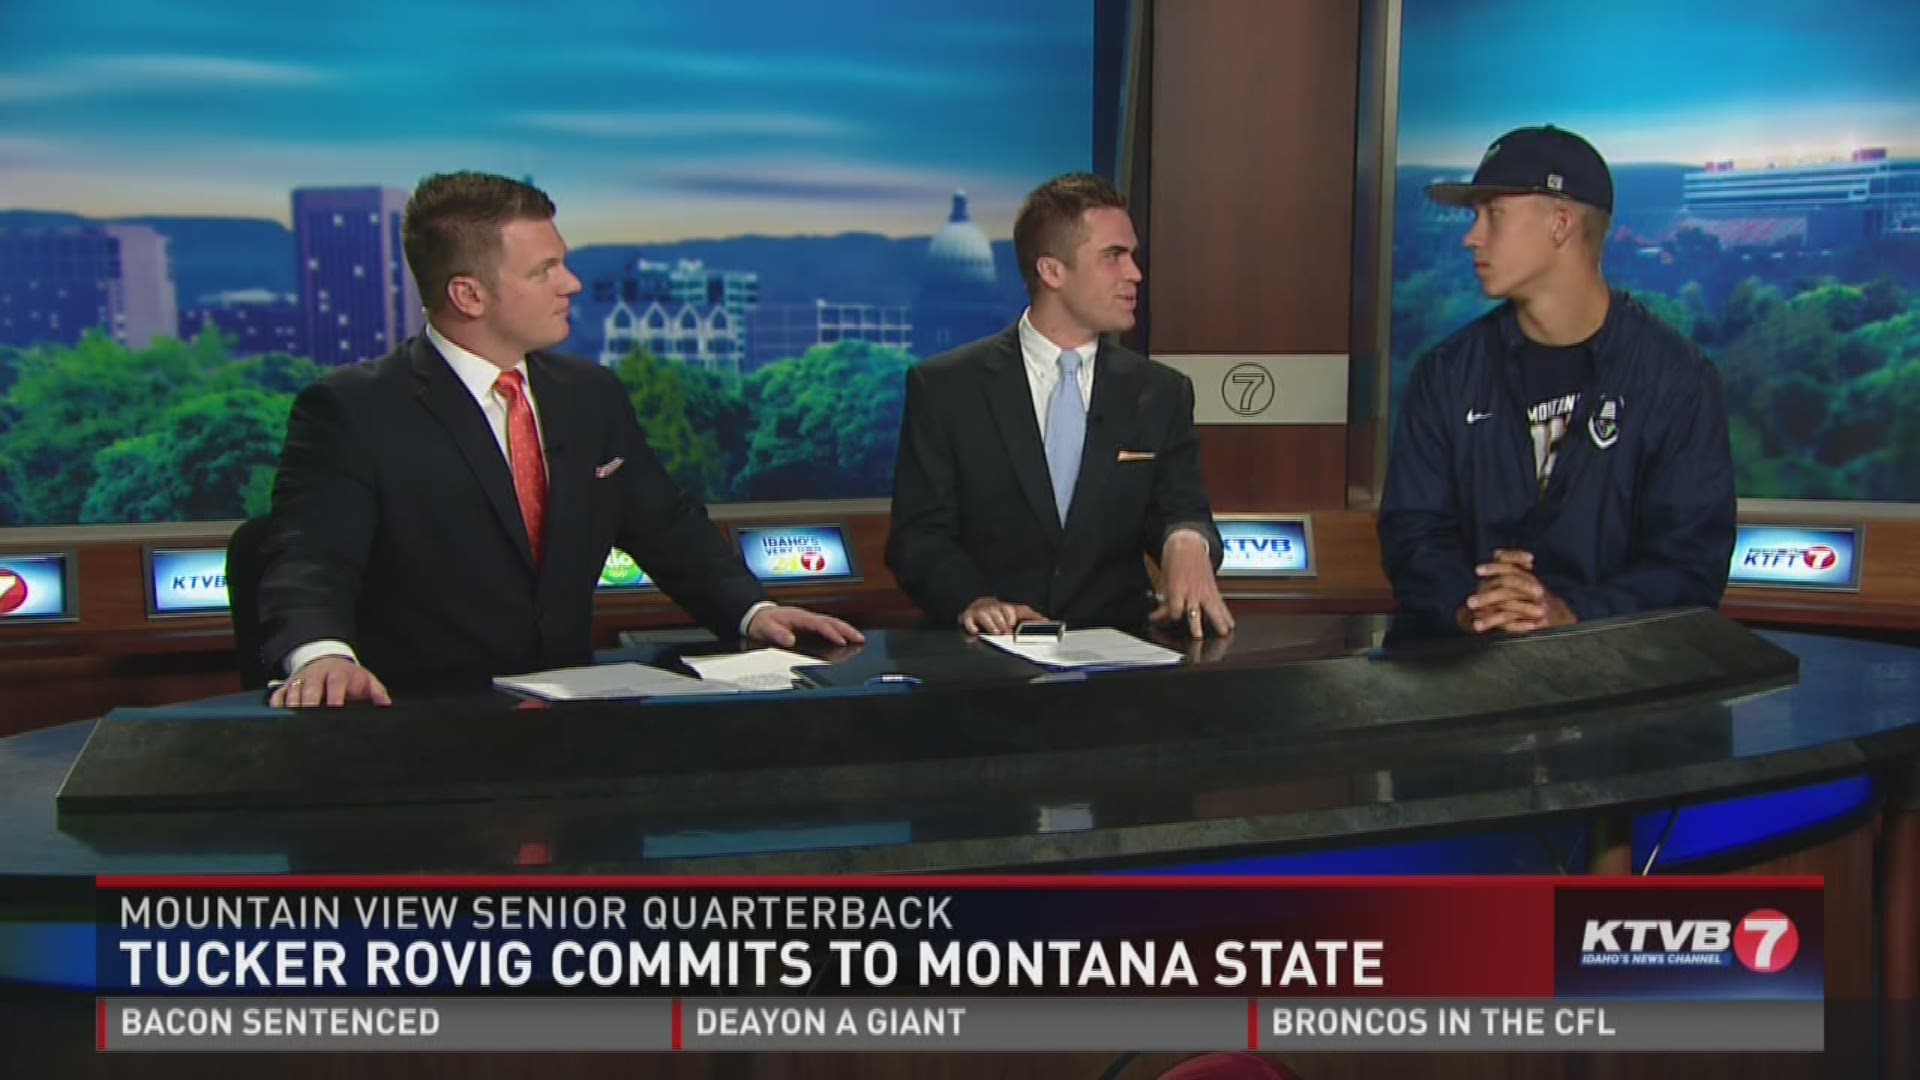 Mountain View senior quarterback Tucker Rovig joined Jay and Will on set to talk about his recent college commitment.